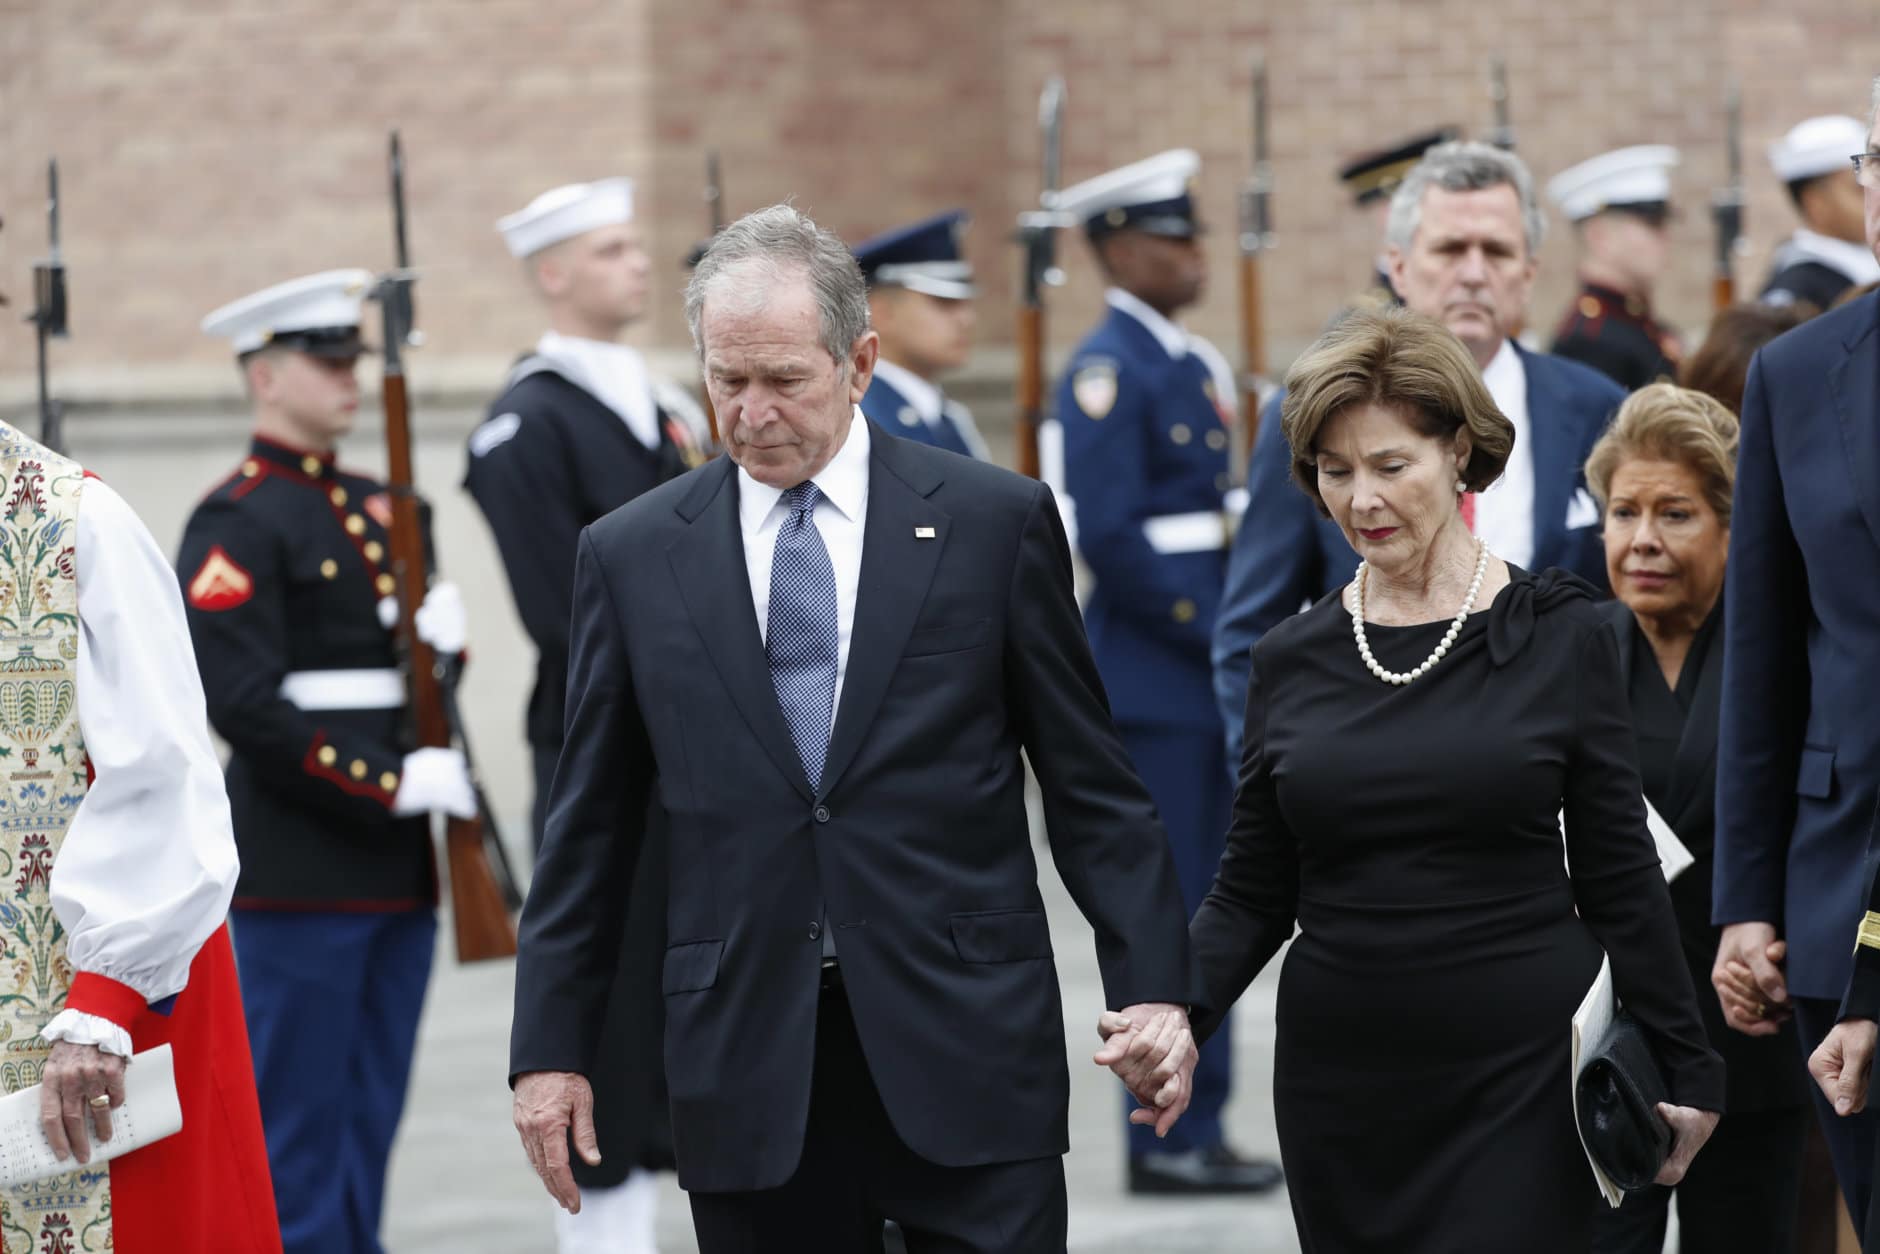 Former President George W. Bush and his wife, Laura Bush, leave St. Martin's Episcopal Church in Houston after the funeral service for his father, former President George H.W. Bush on Thursday, Dec. 6, 2018. (AP Photo/Gerald Herbert)